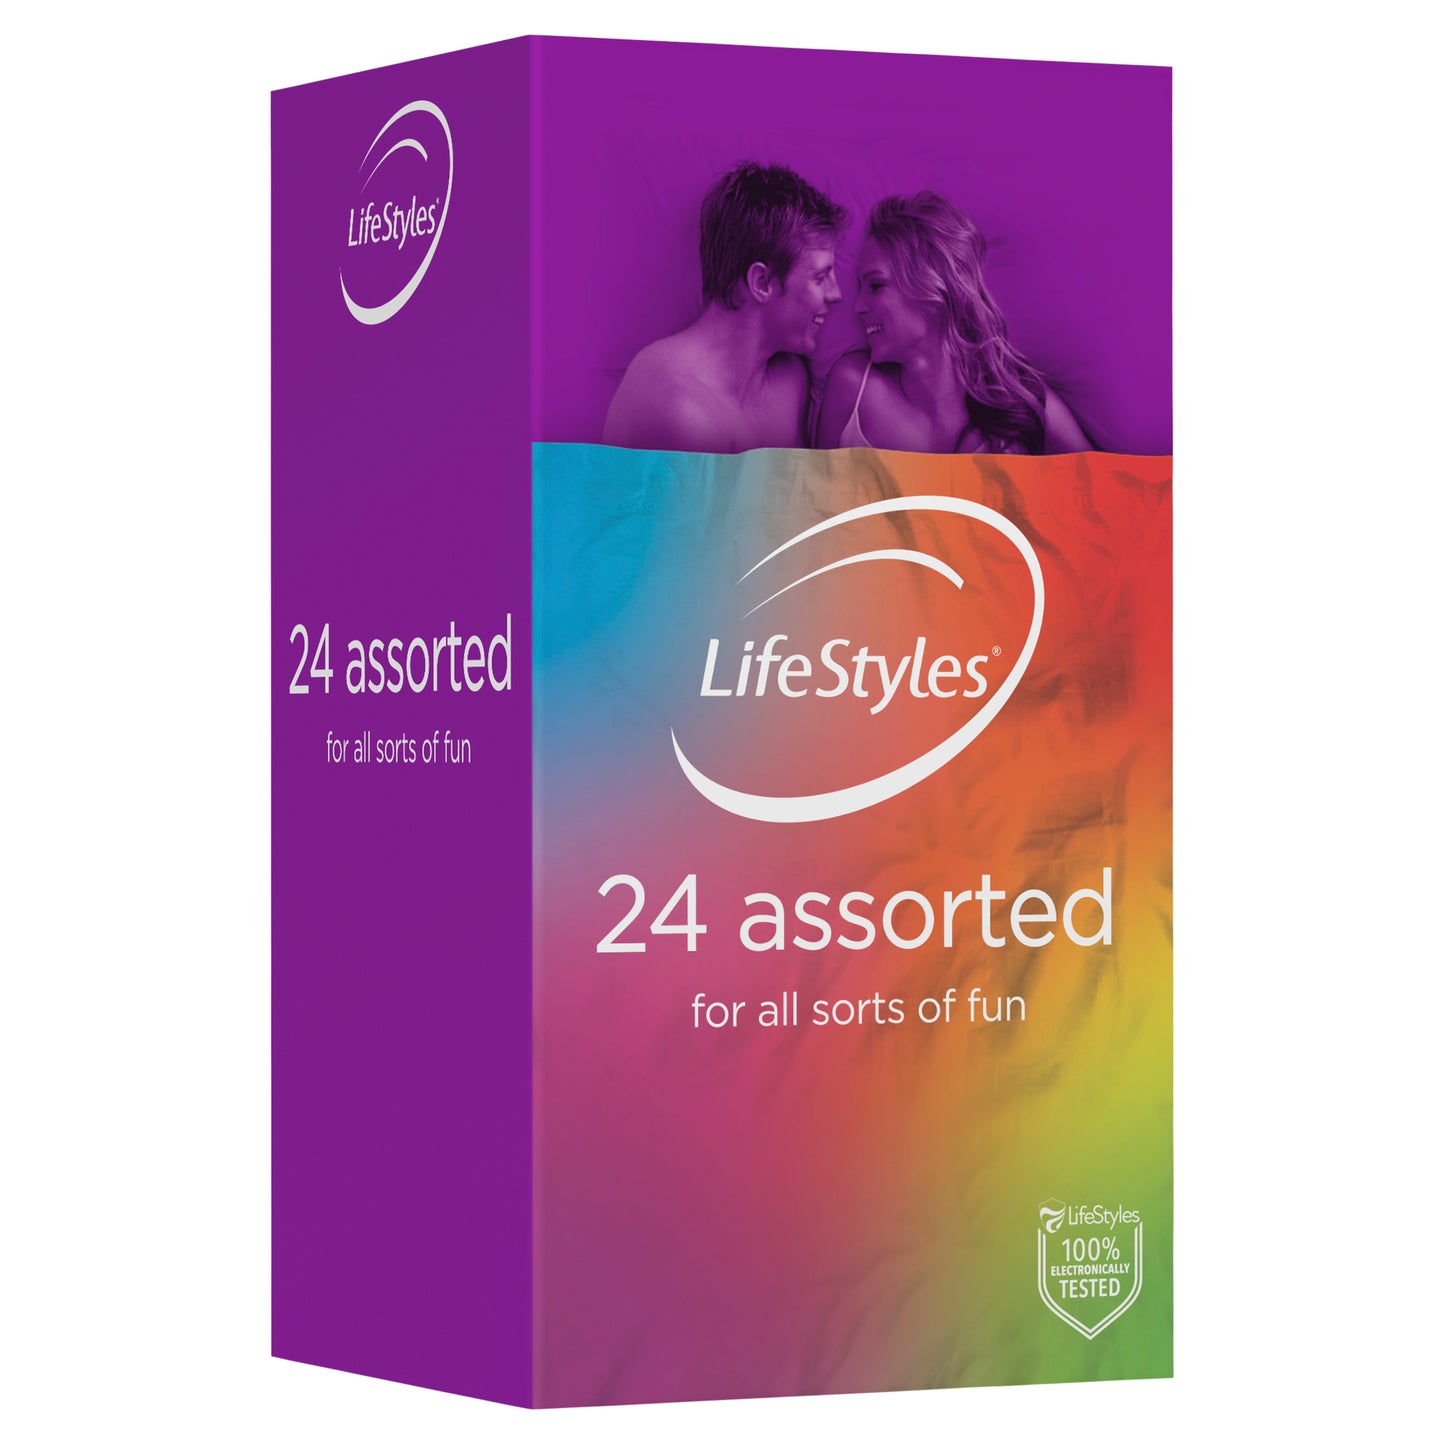 LifeStyles Assorted Condoms 20 - Just for you desires